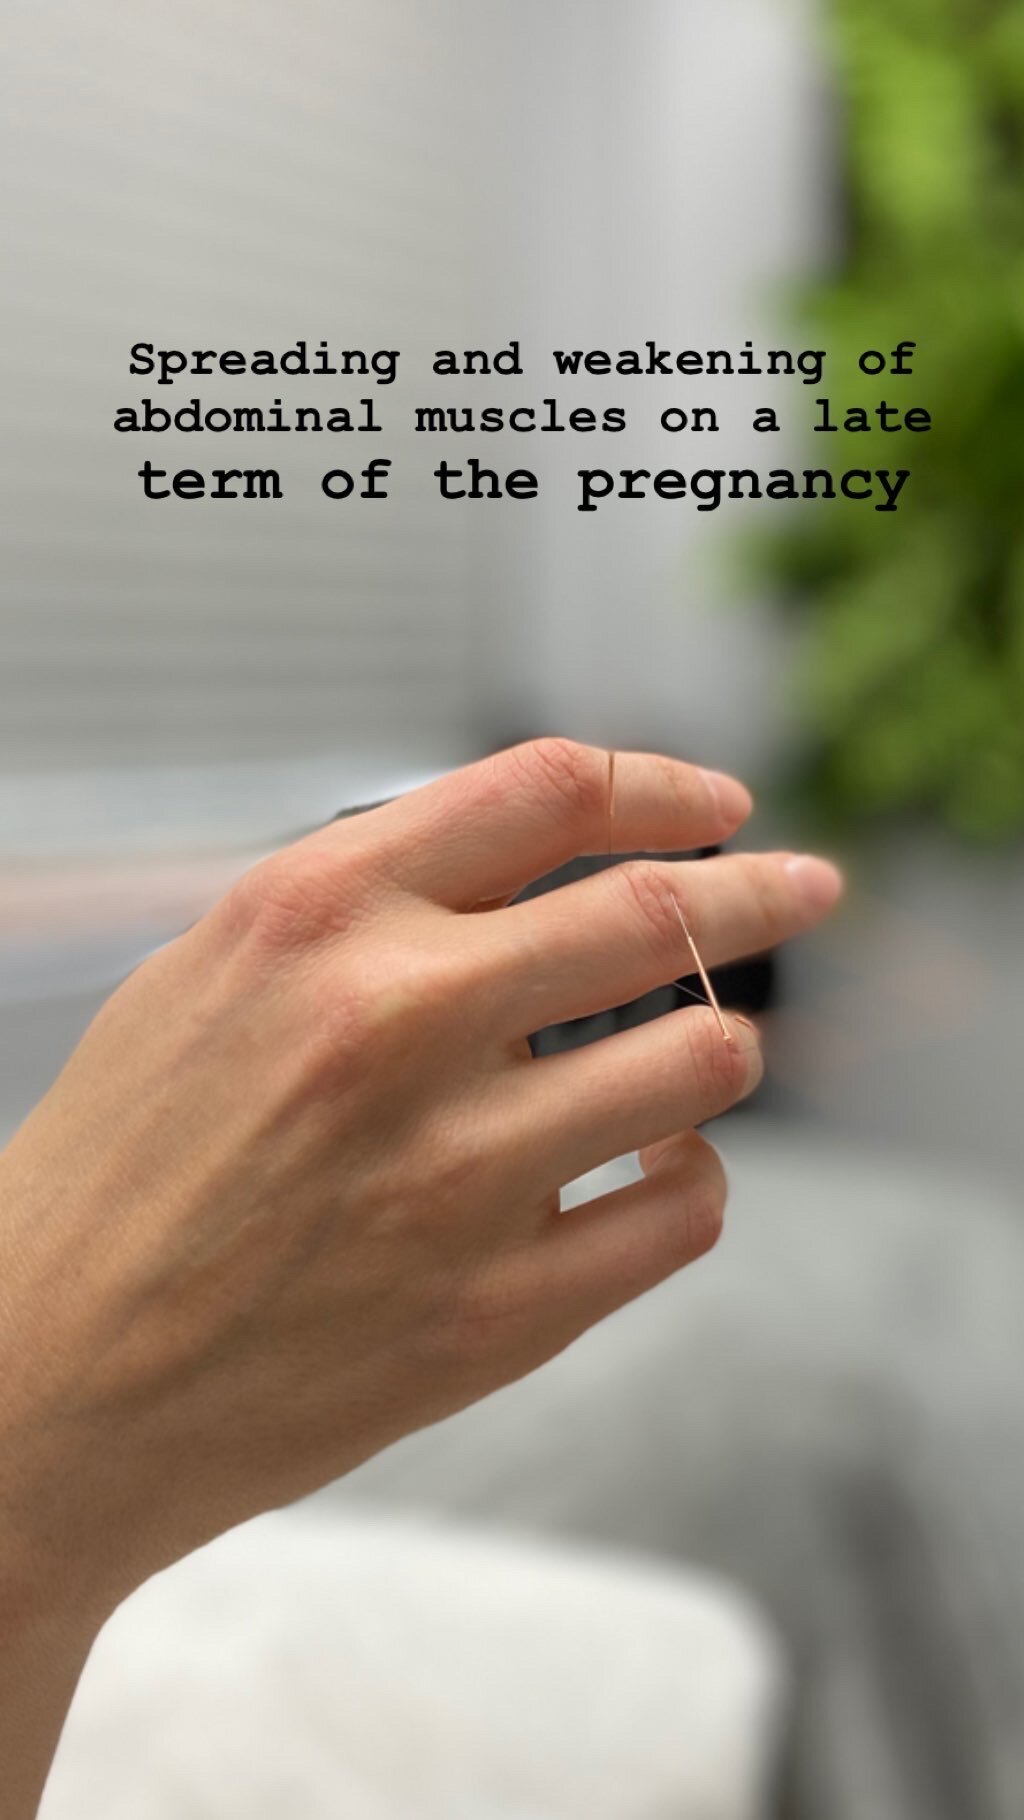  SuJok acupuncture in Vancouver used to treat fertility and reproductive health. Patient received treatment for the weakening of abdominal muscles during late term pregnancy 